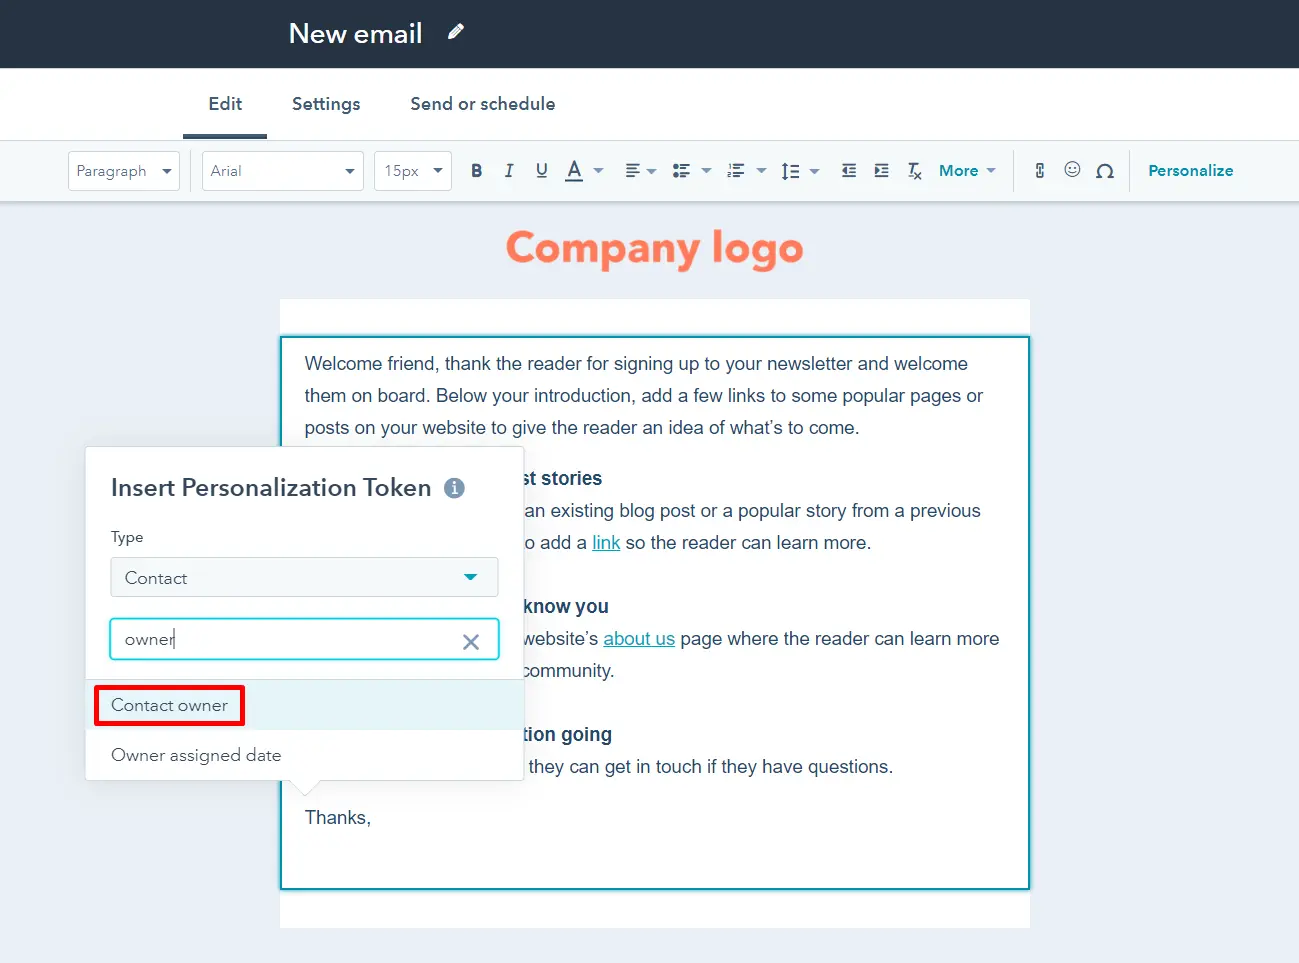 Personalization Token in HubSpot email